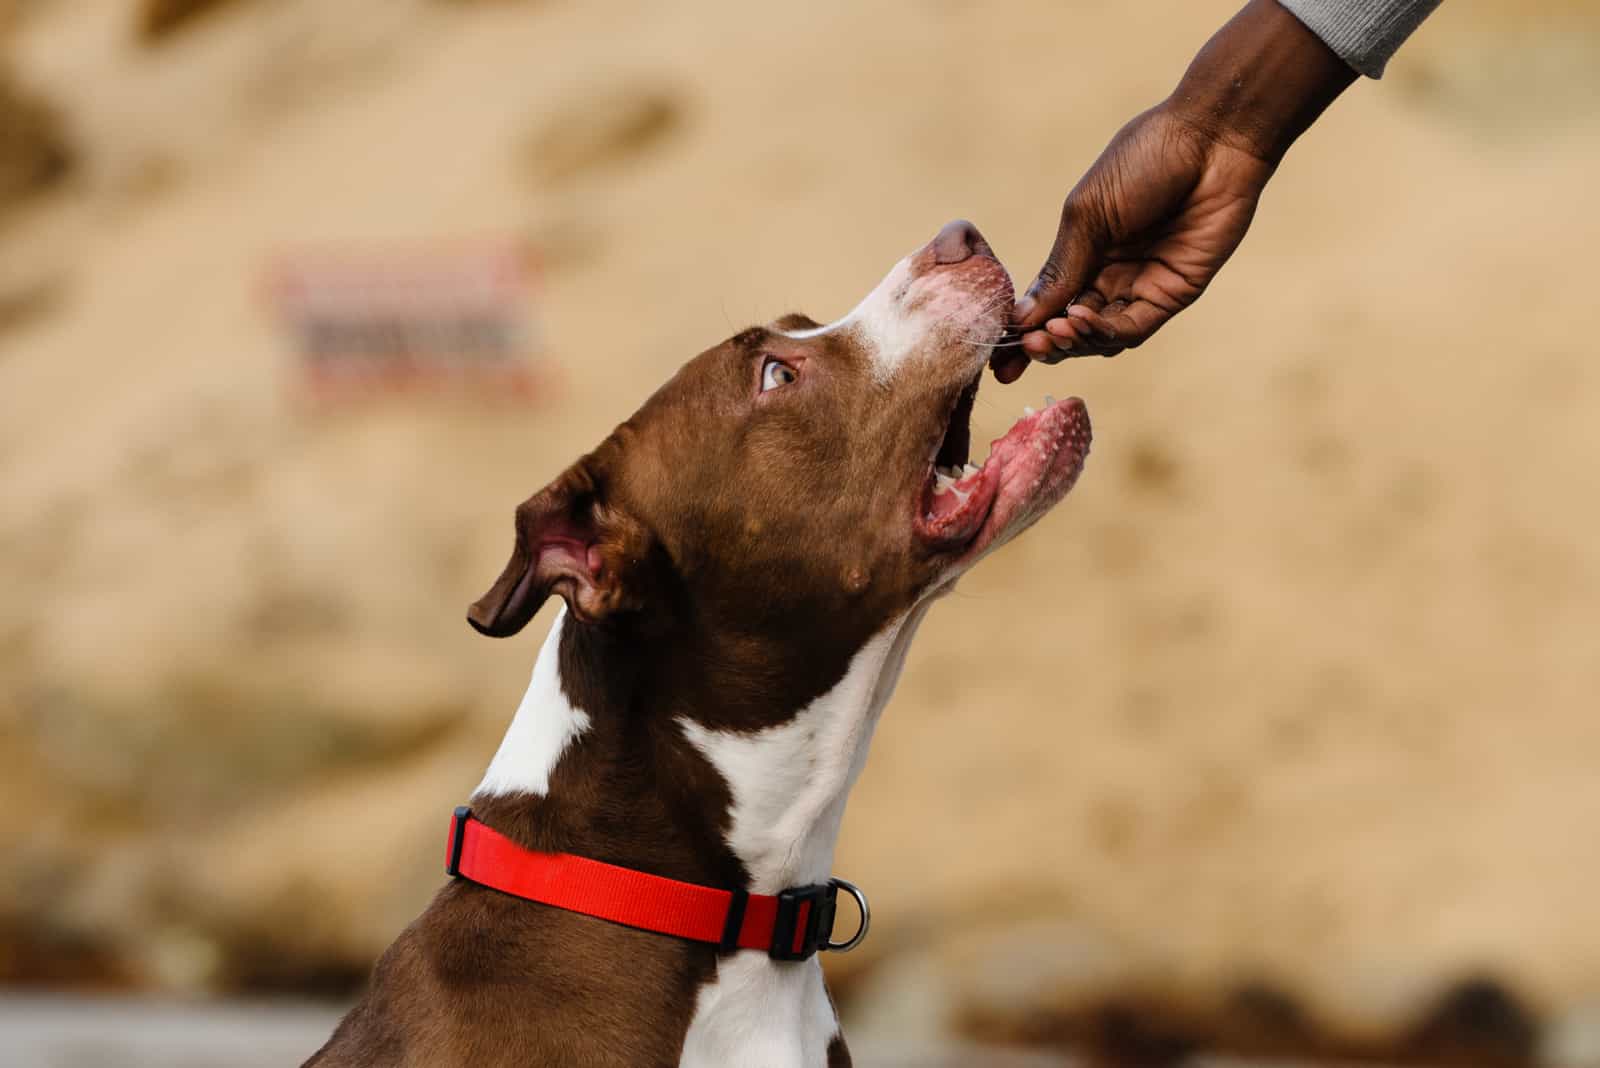 american pitbull terrier being fed a treat by the owner